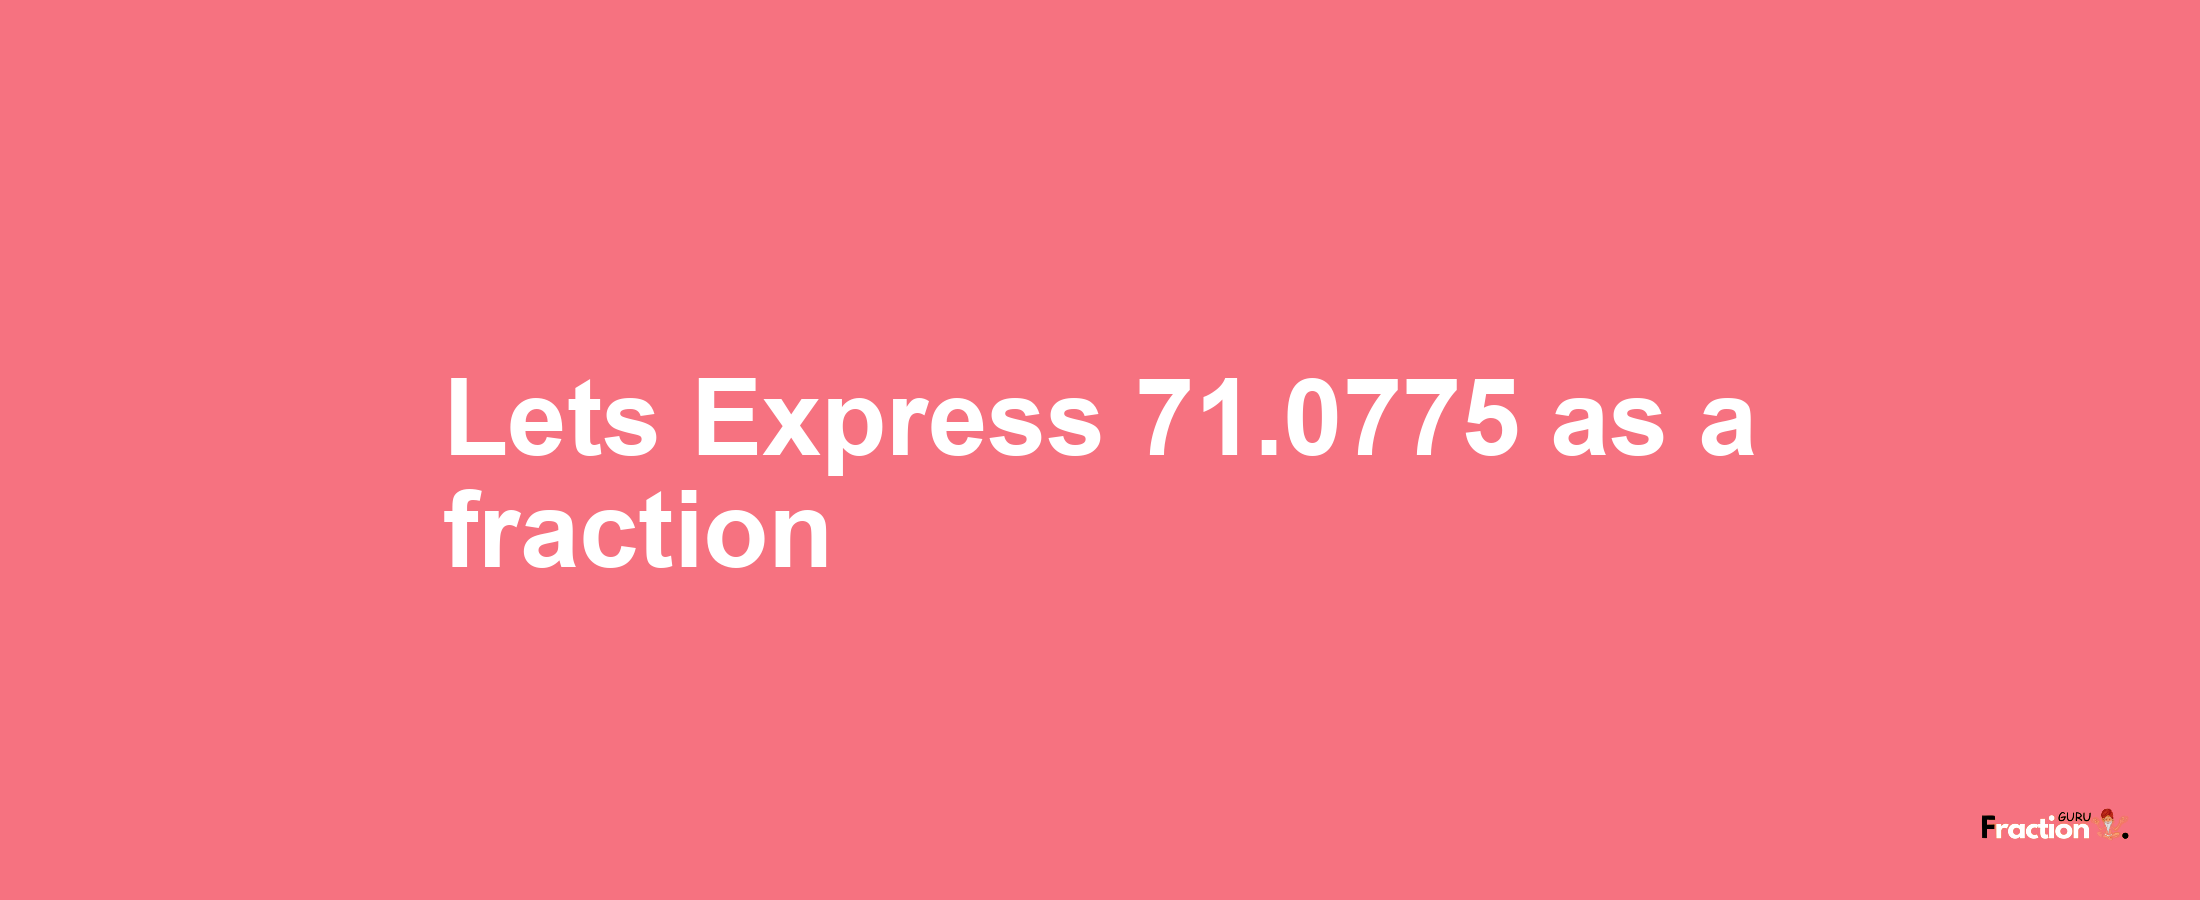 Lets Express 71.0775 as afraction